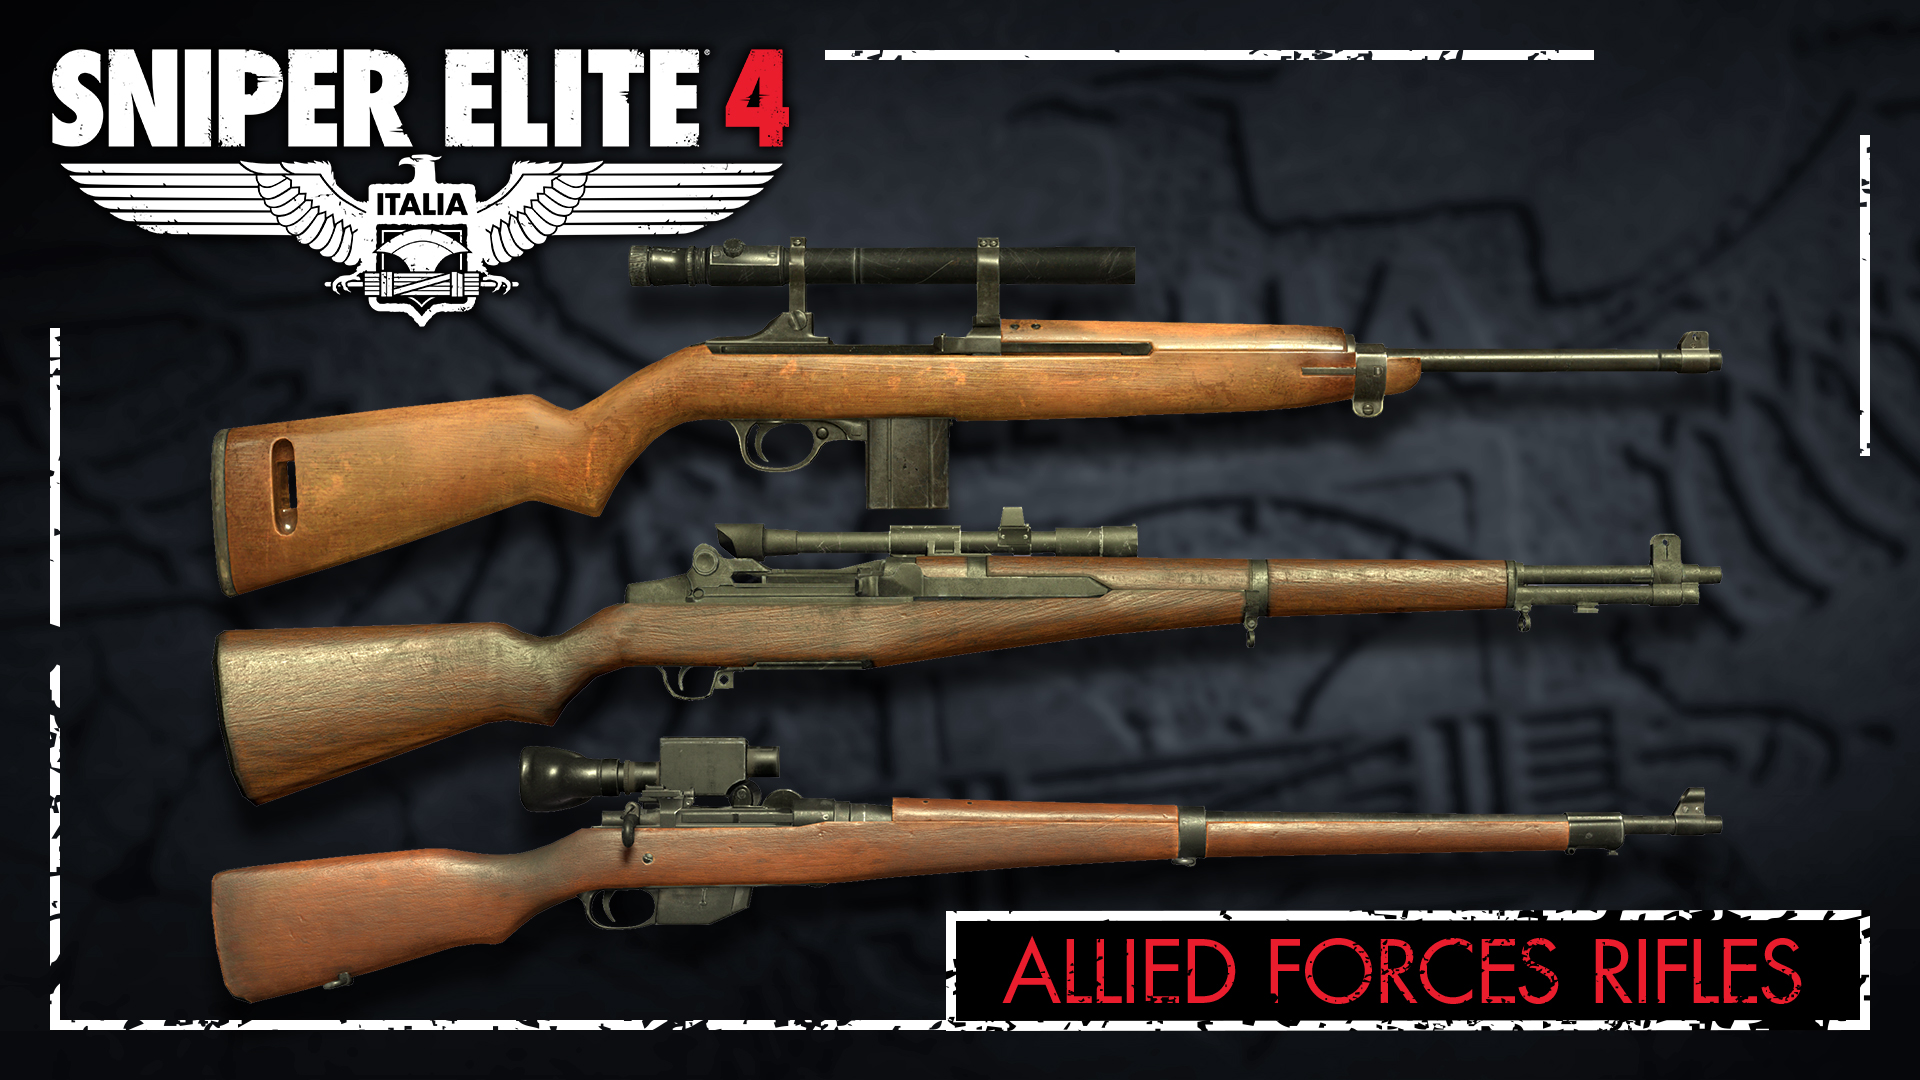 Sniper Elite 4 - Allied Forces Rifle Pack Featured Screenshot #1